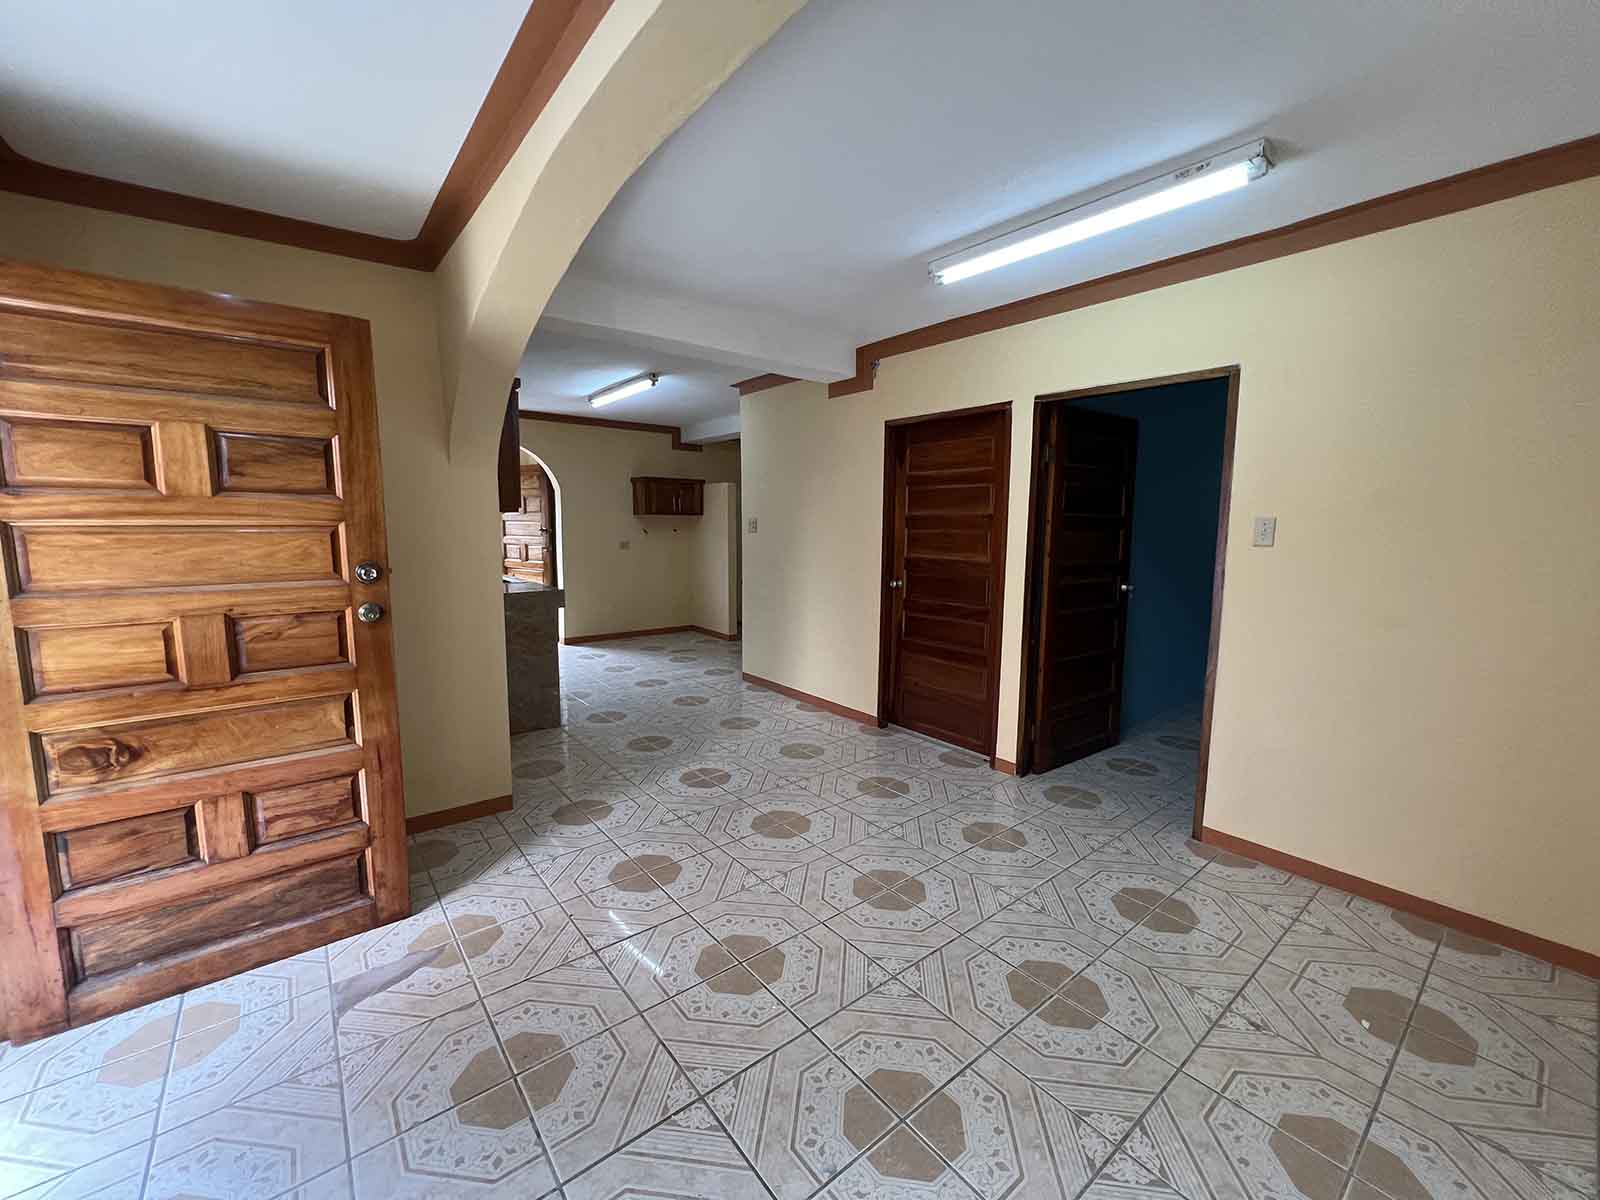 FOR RENT: Unfurnished 2 Bed | 1 Bath Apartment located Downtown, Belize City